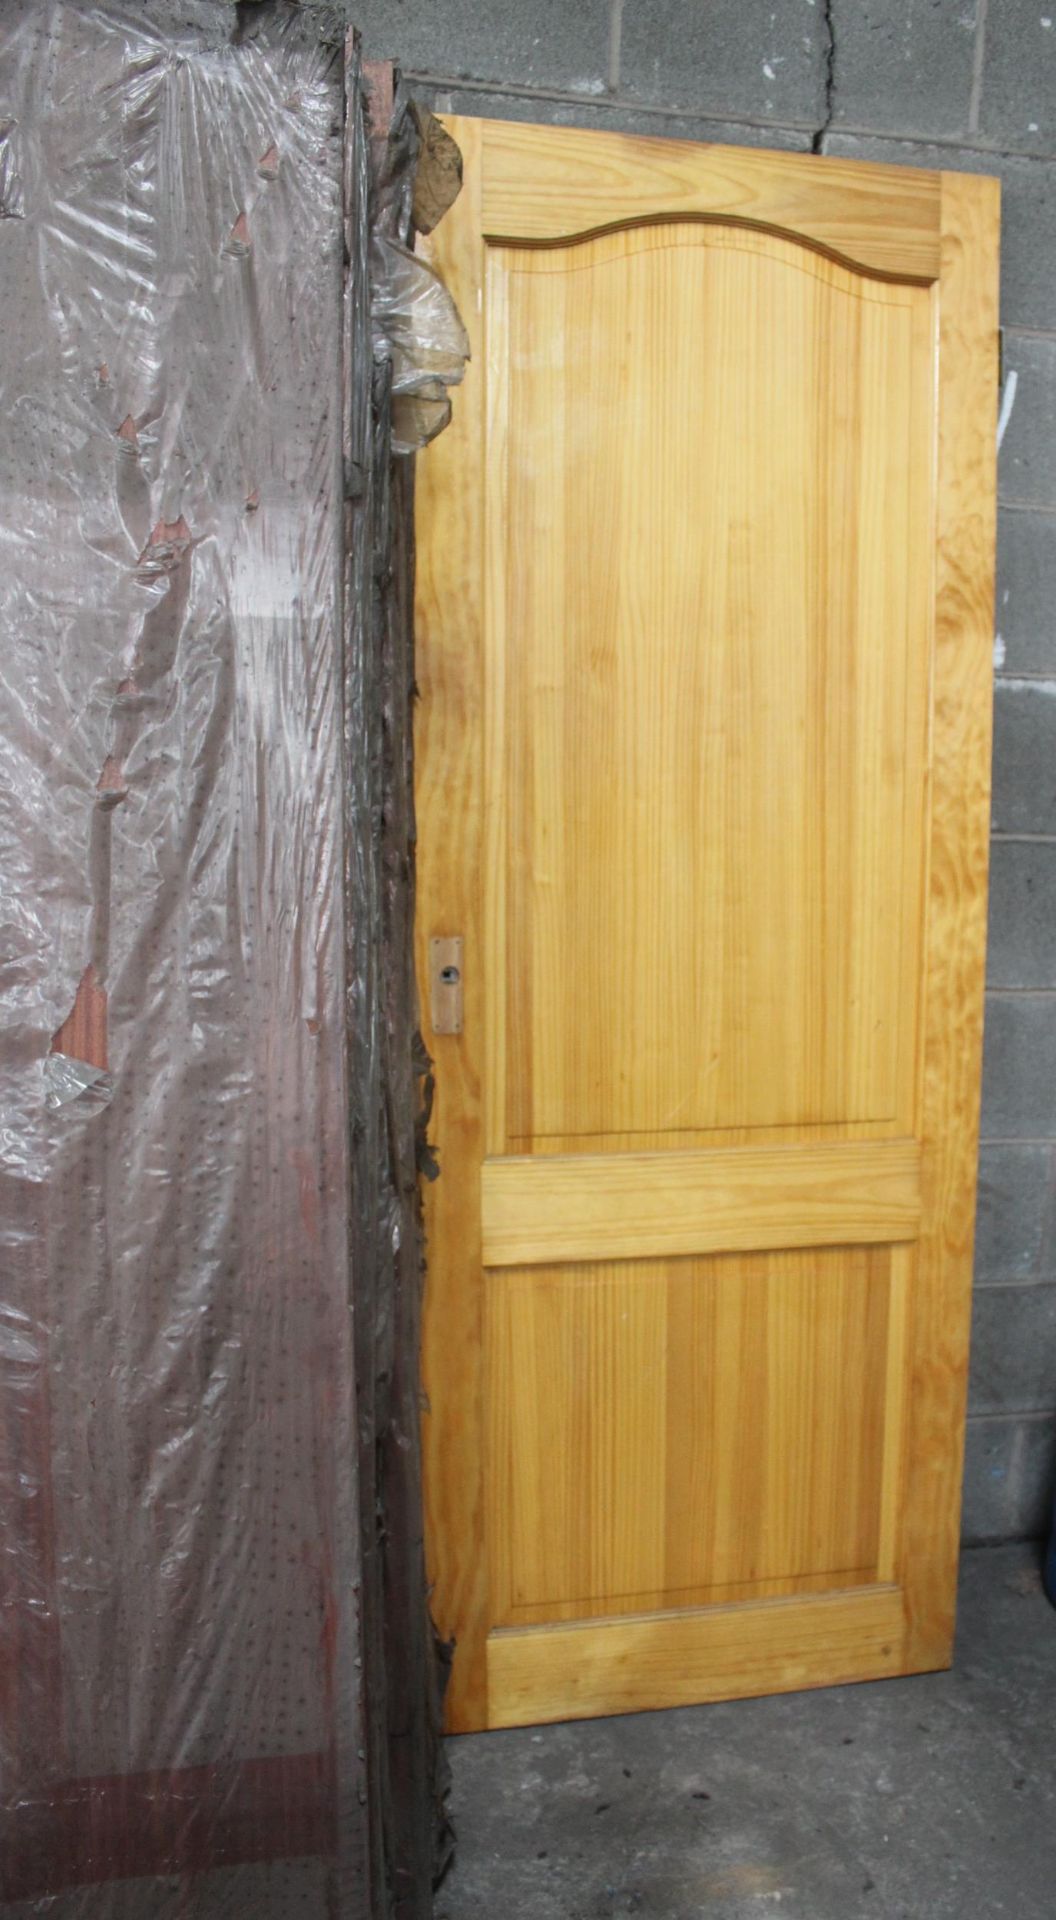 A LARGE QUANTITY OF INTERNAL WOODEN DOORS - Image 2 of 3